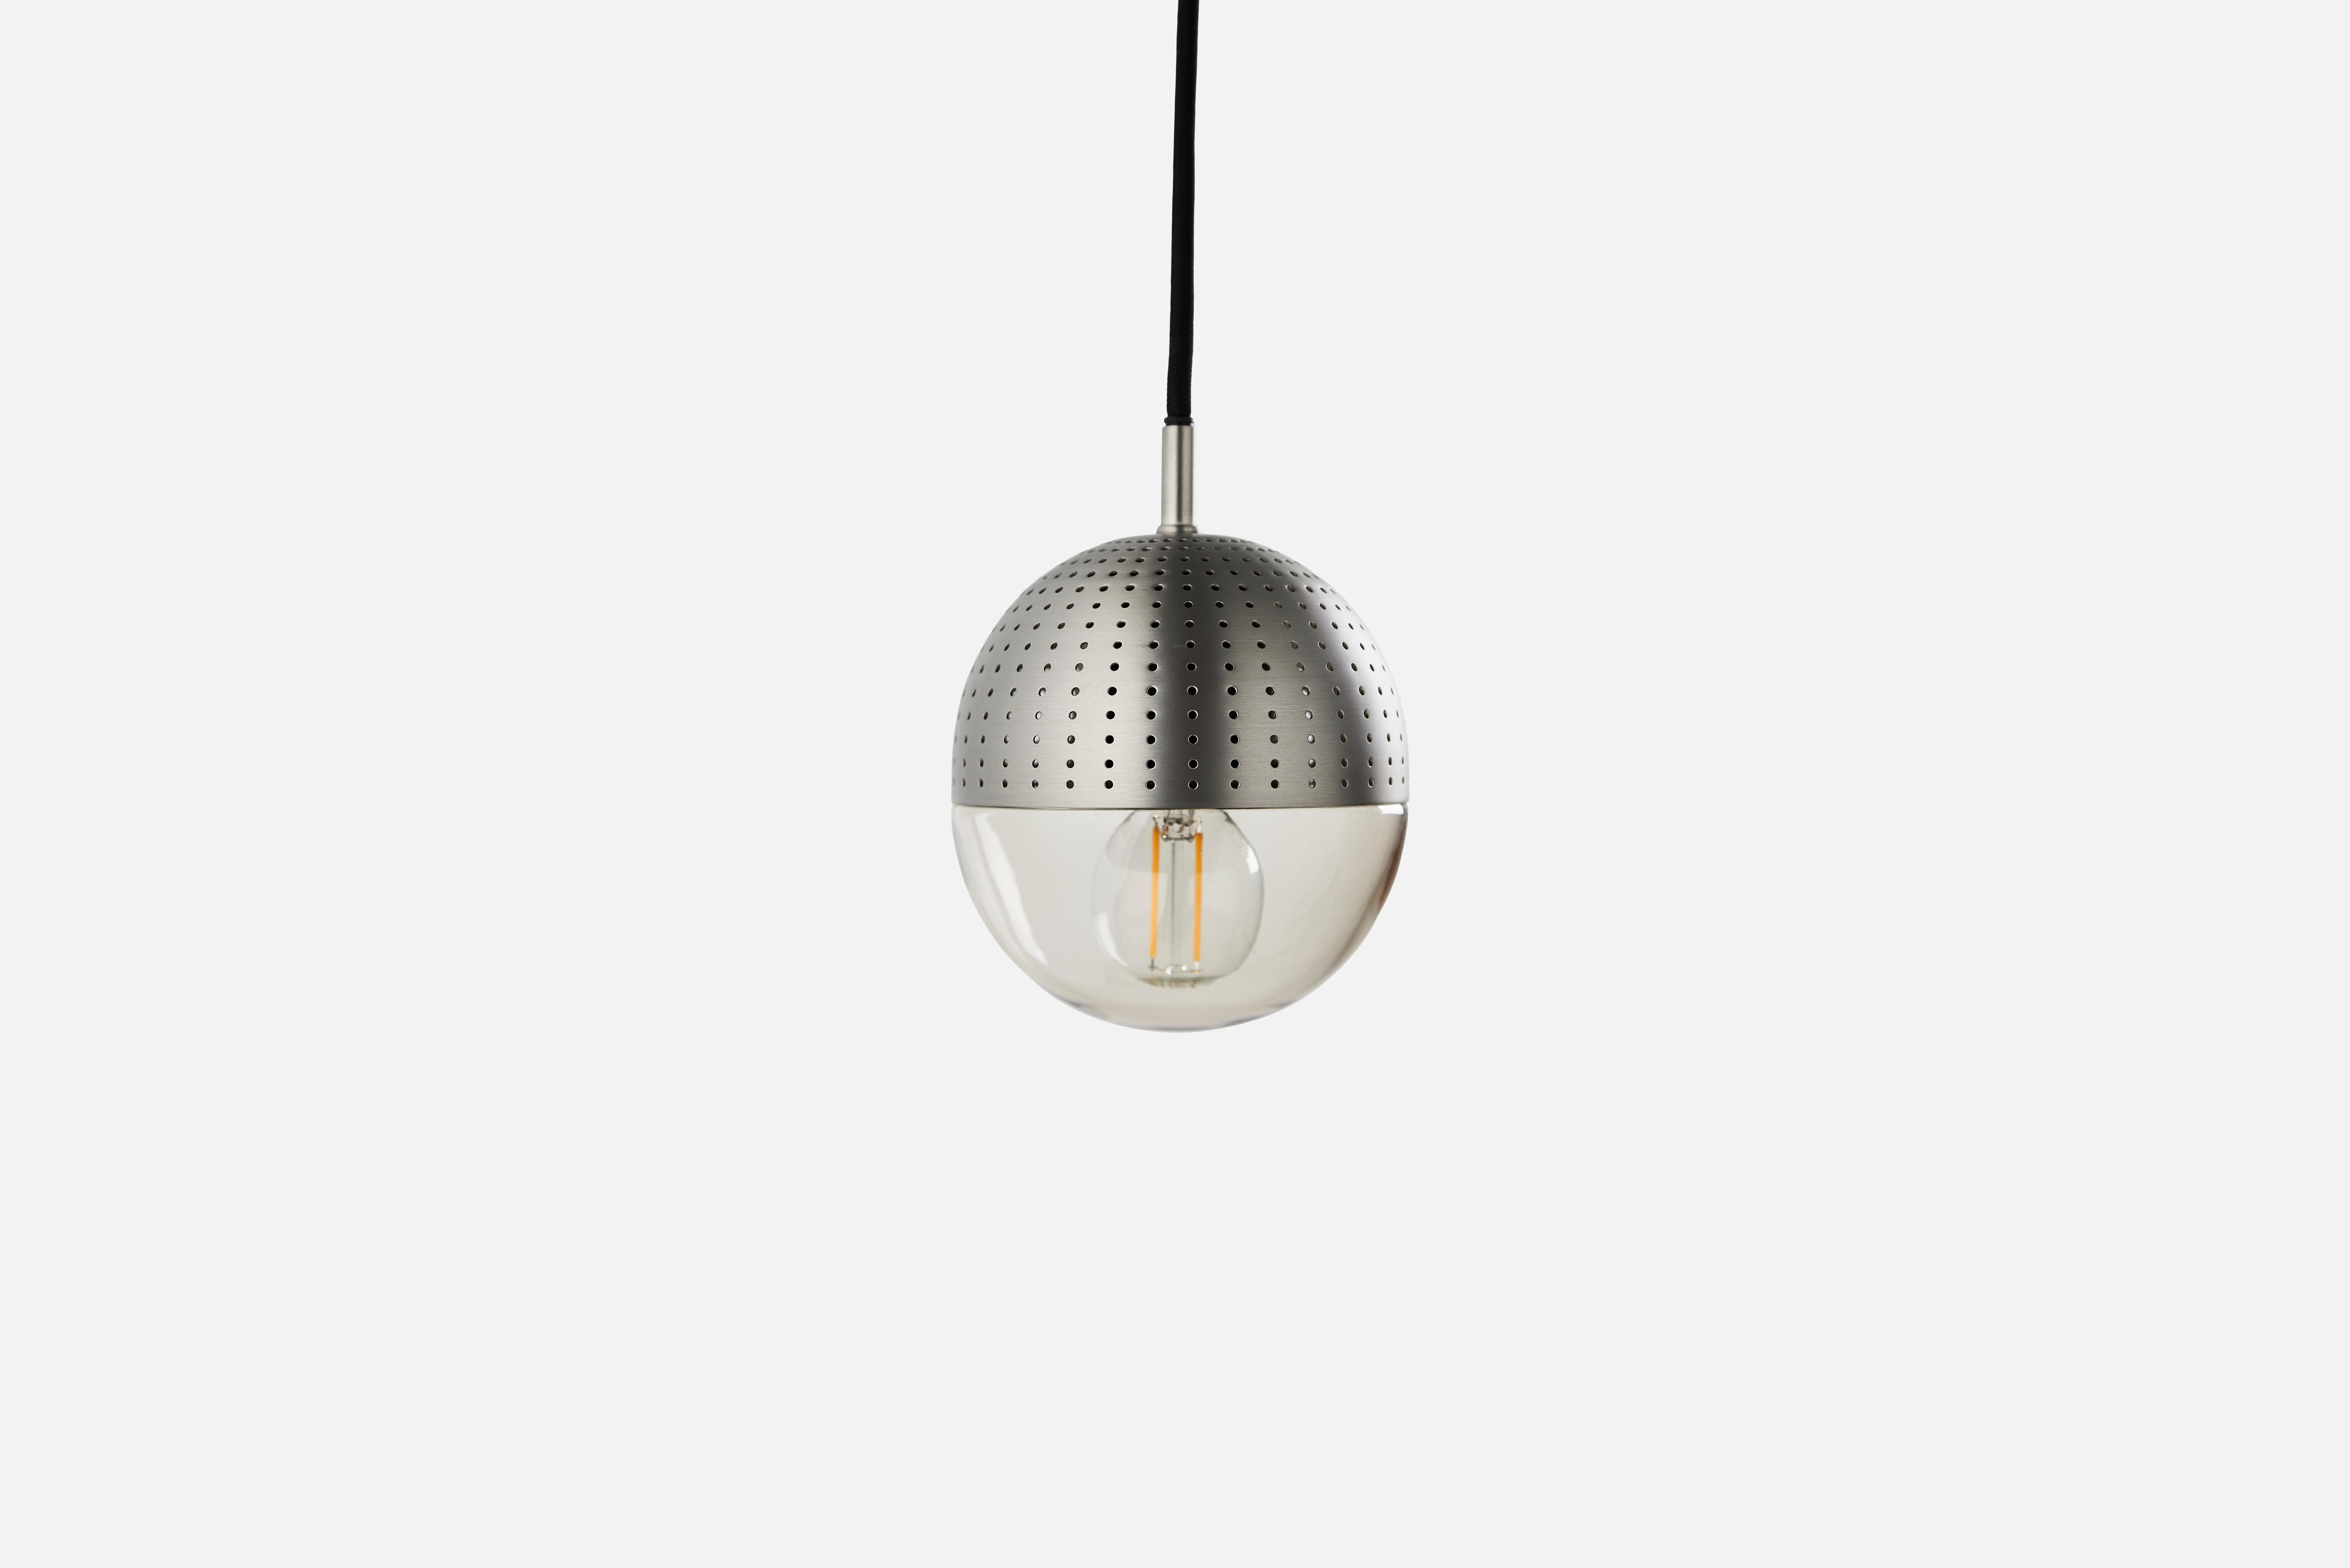 Small Satin dot pendant lamp by Rikke Frost
Materials: Metal, glass.
Dimensions: D 14 x H 13 cm
Available in black or satin and in 3 sizes: H 13, H 16.6, H 21 cm.

Rikke Frost is a Danish graduate from the School of Architecture Aarhus. Since